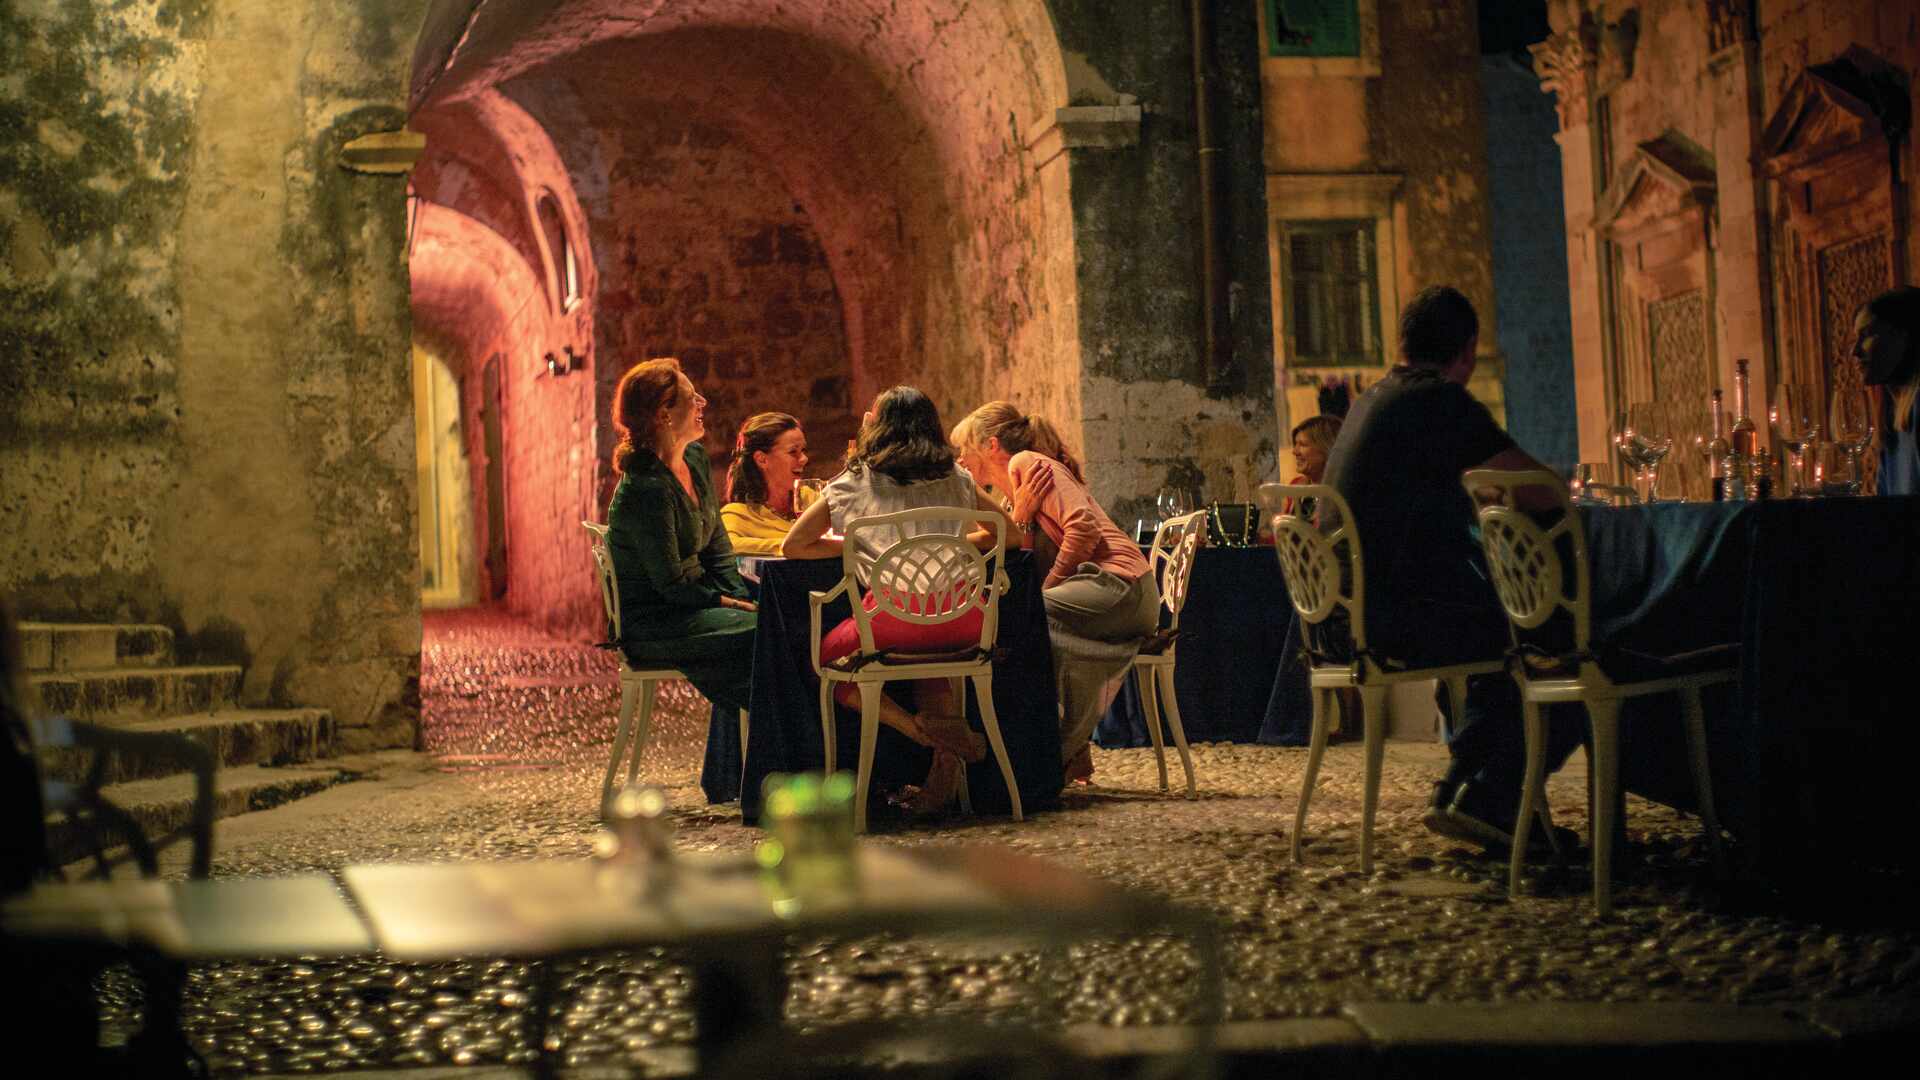 A group of women dining together, Croatia